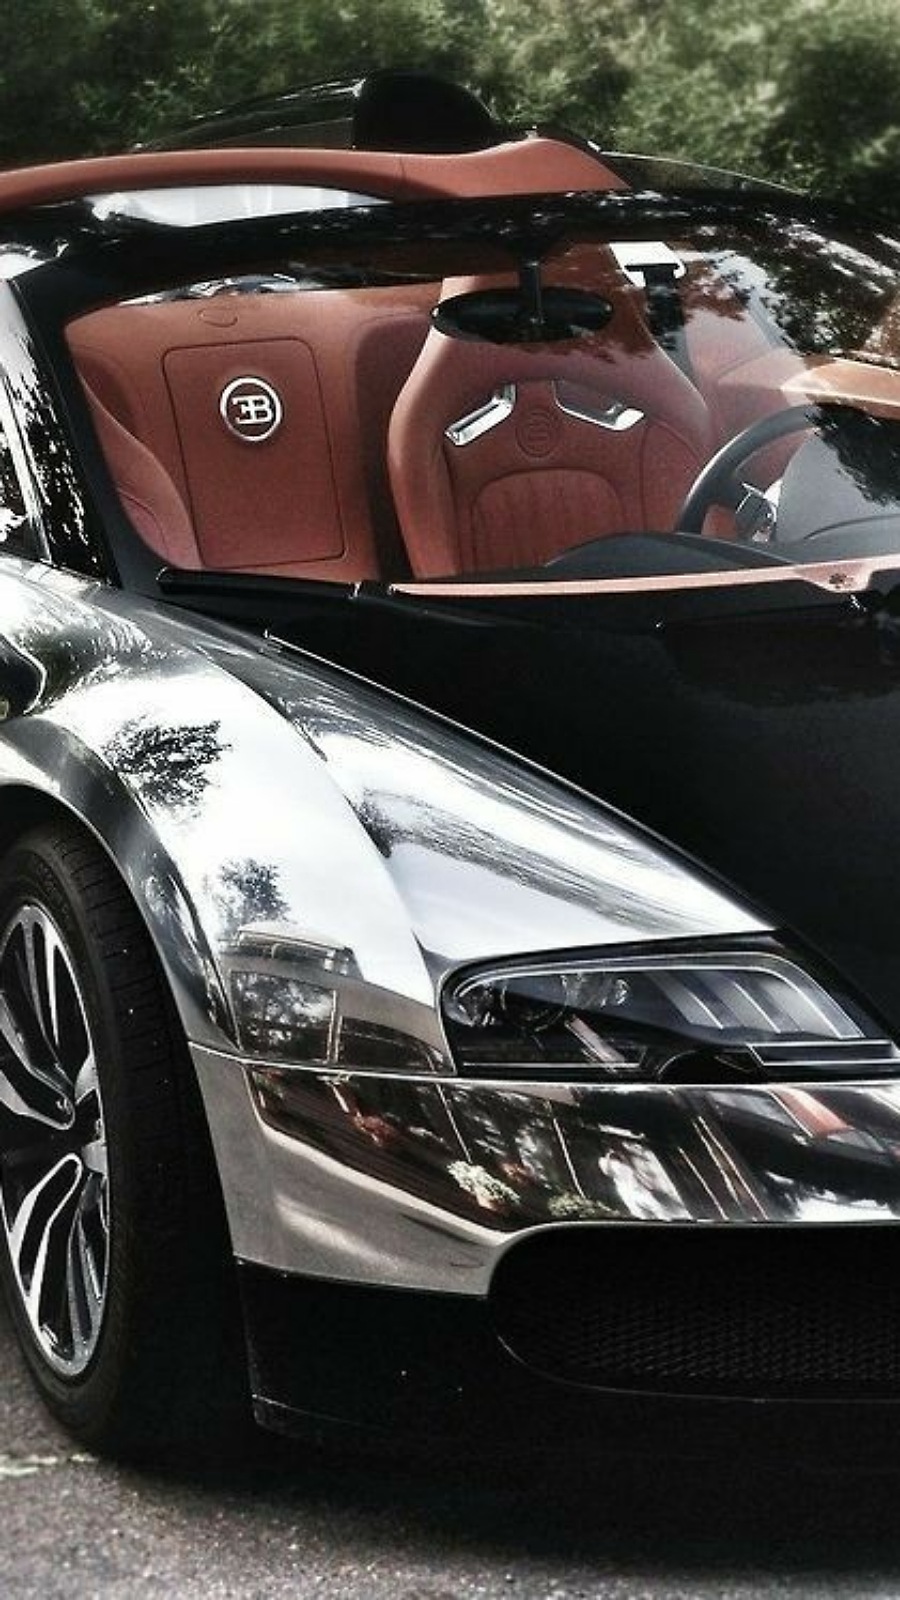 Cabrio Bugatti HD Wallpapers Free Download – Best Wallpapers